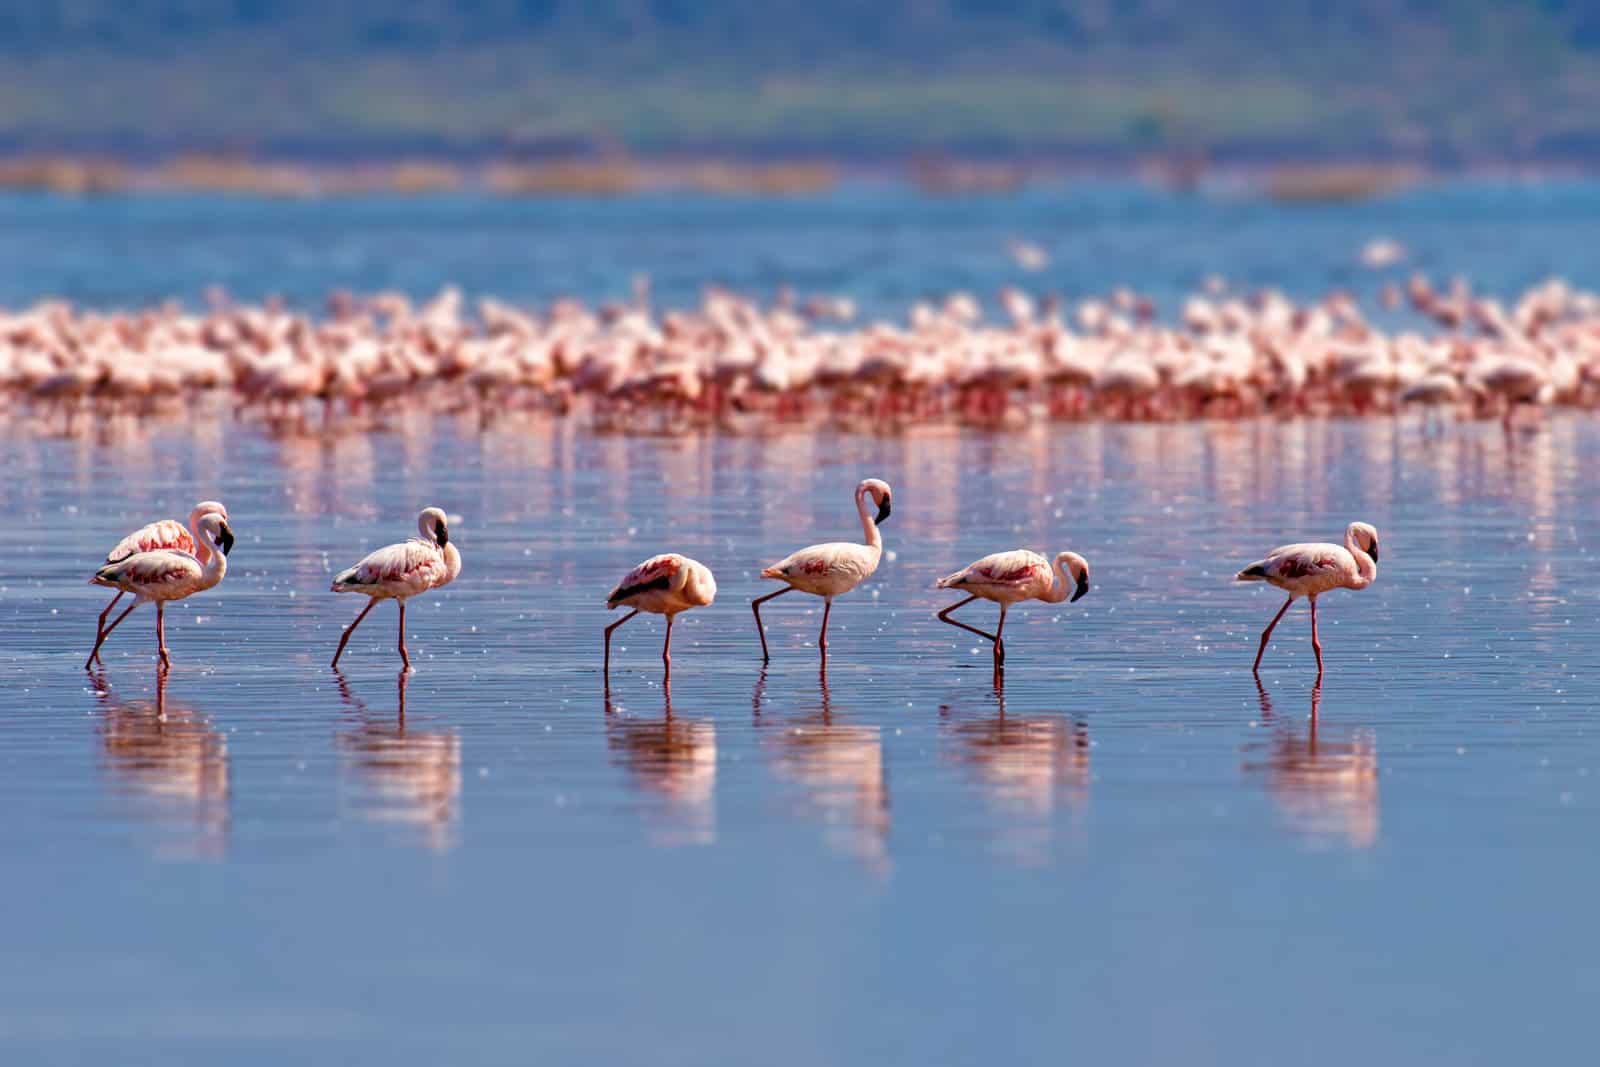 Your 101 Guide to The Flamingos’ Life: All You Need to Know About The Dazzling Pink Birds